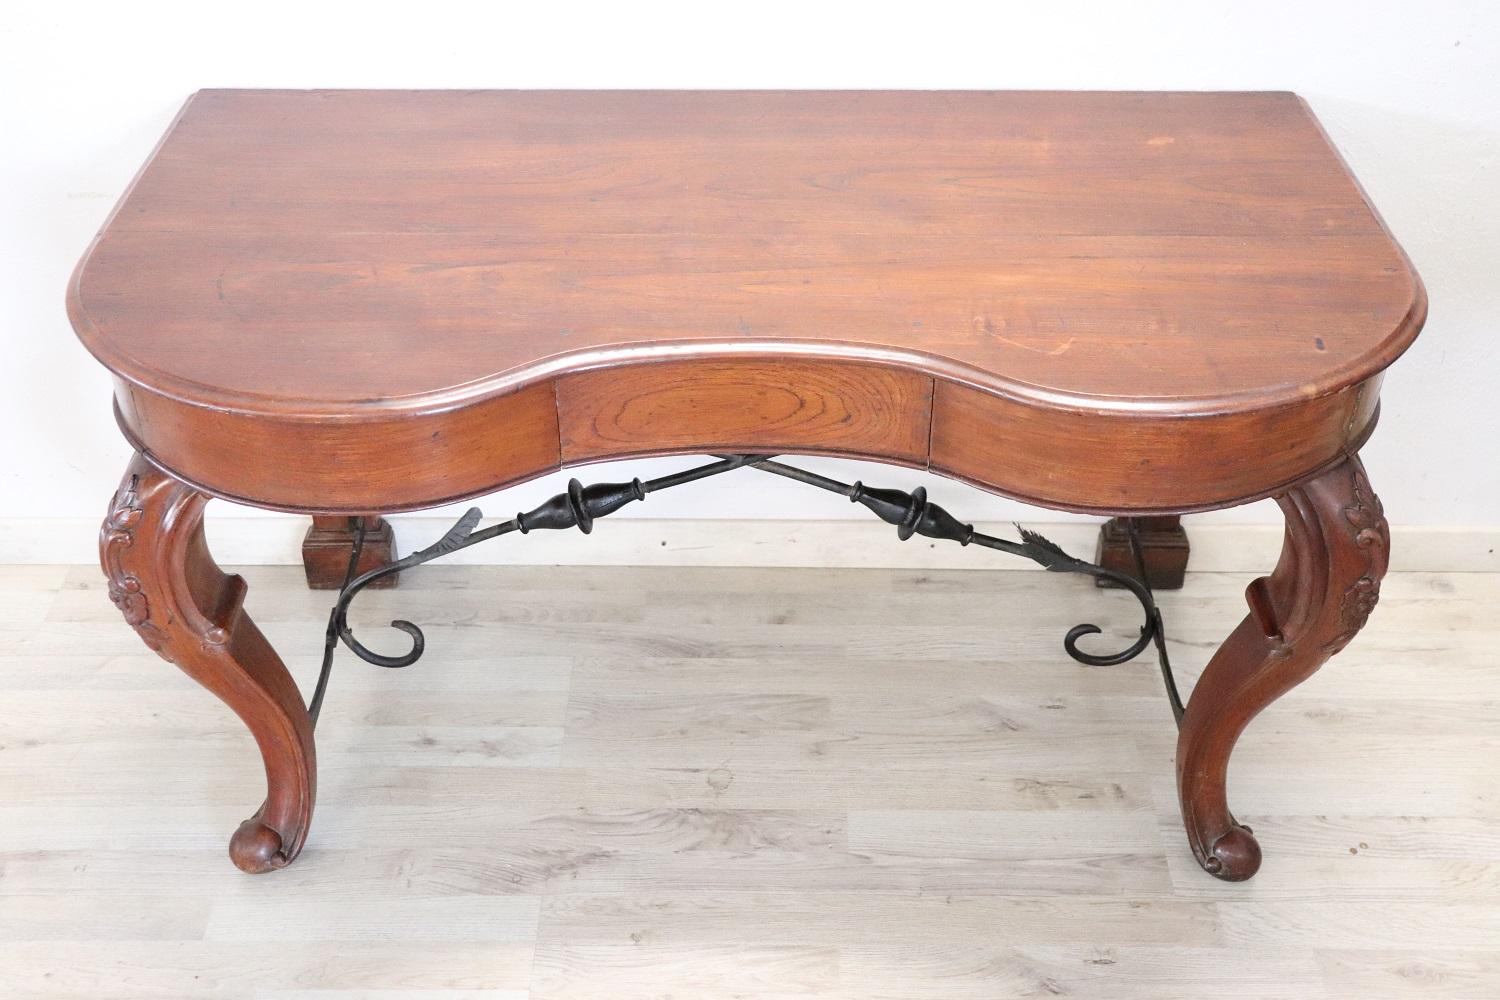 Rare Antique console table 1780s. The console is made of solid oak wood. On the front two comfortable drawers. The front legs are sinuous and moved as the Louis XV period dictates. A wrought iron decoration acts as a cross between the legs.